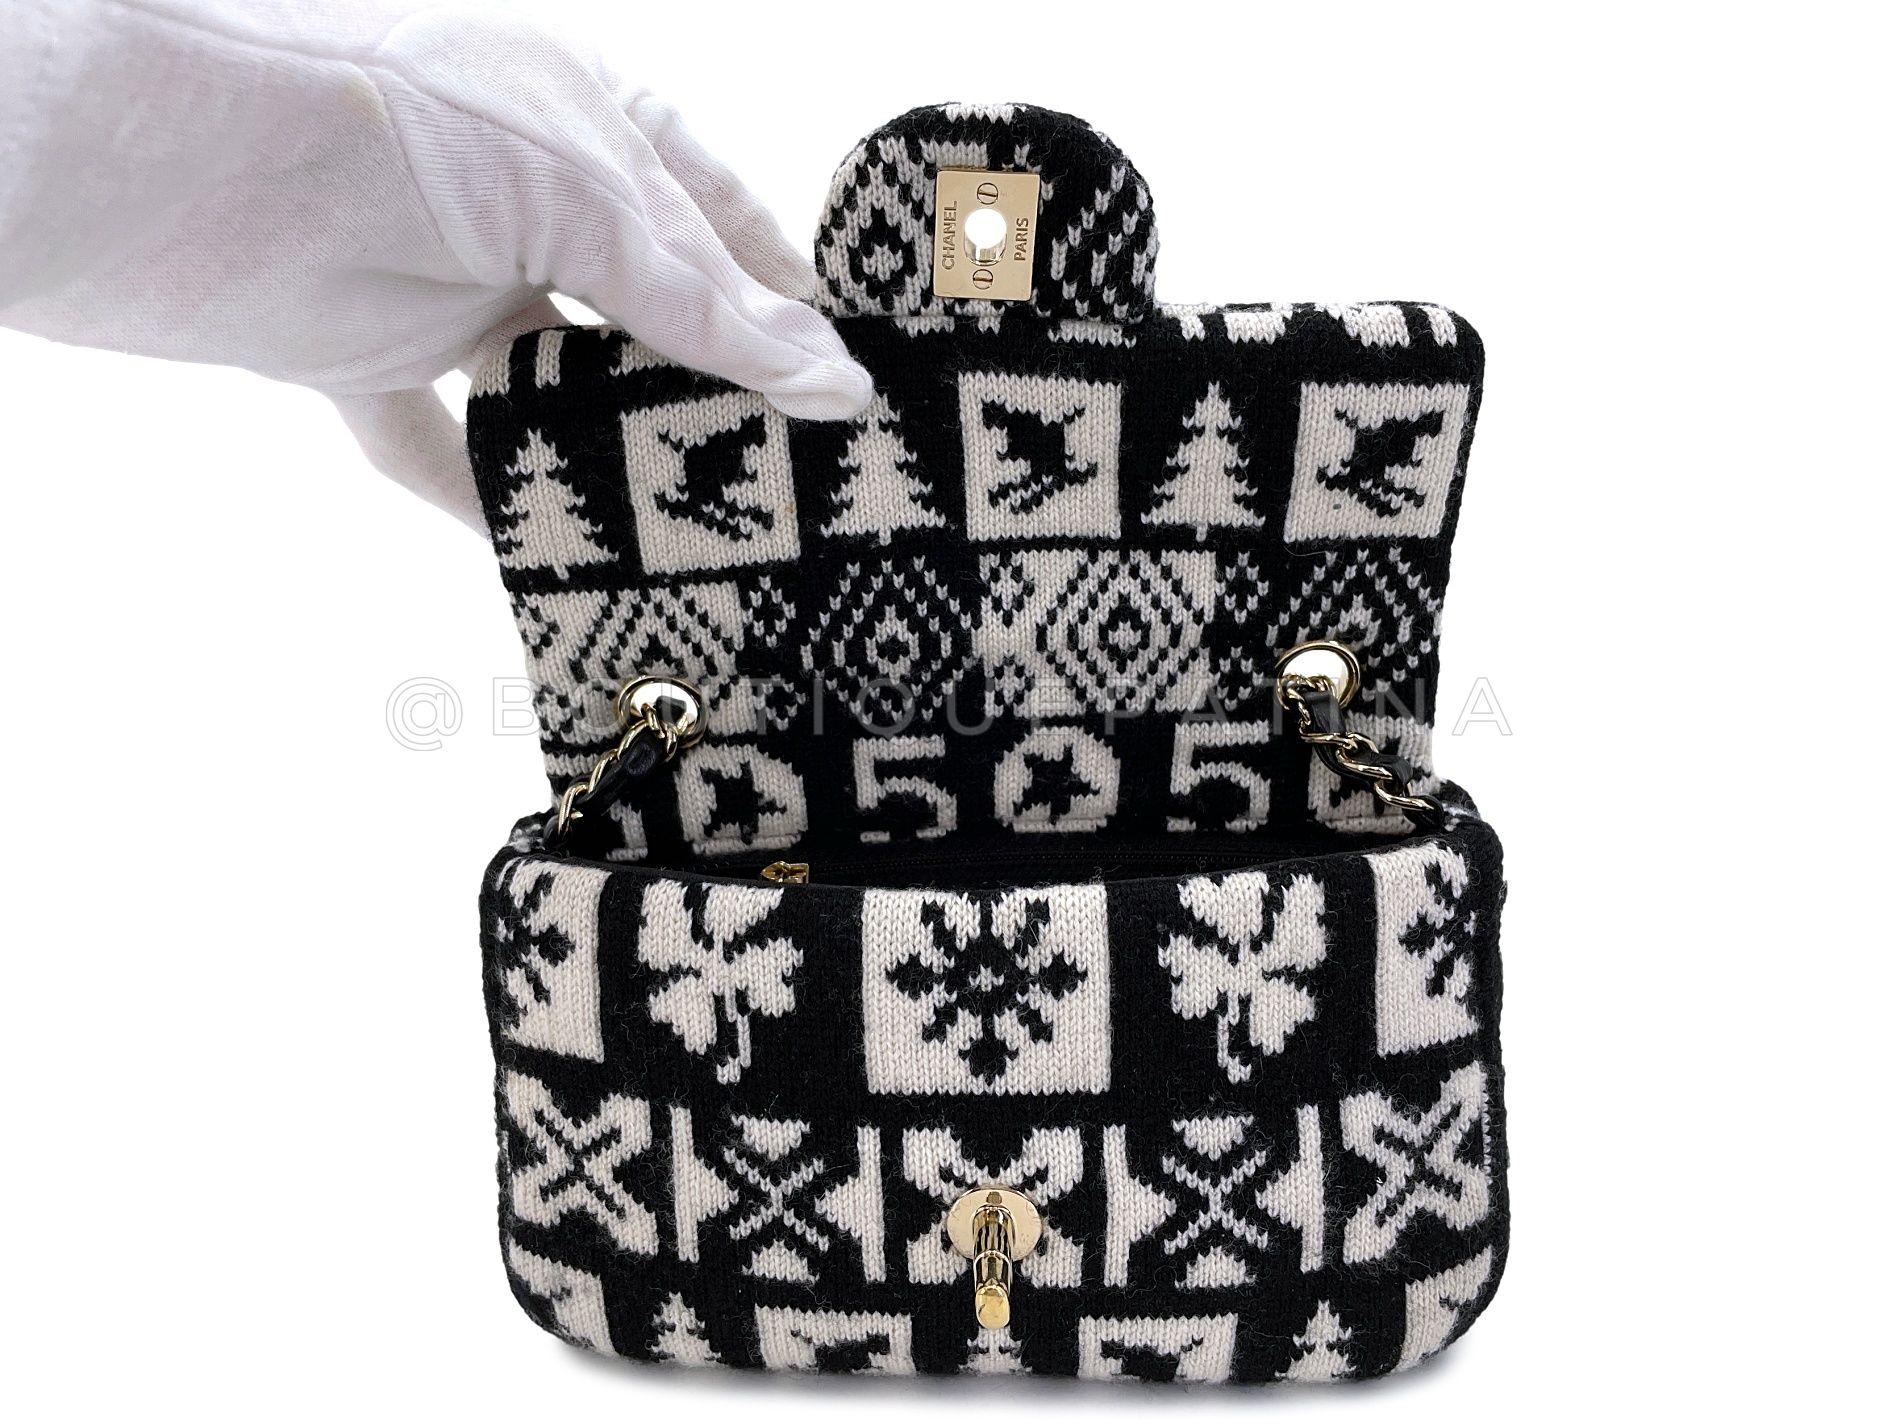 Chanel Coco Neige Rectangular Mini Flap Bag Cashmere Knit 68052 For Sale 5